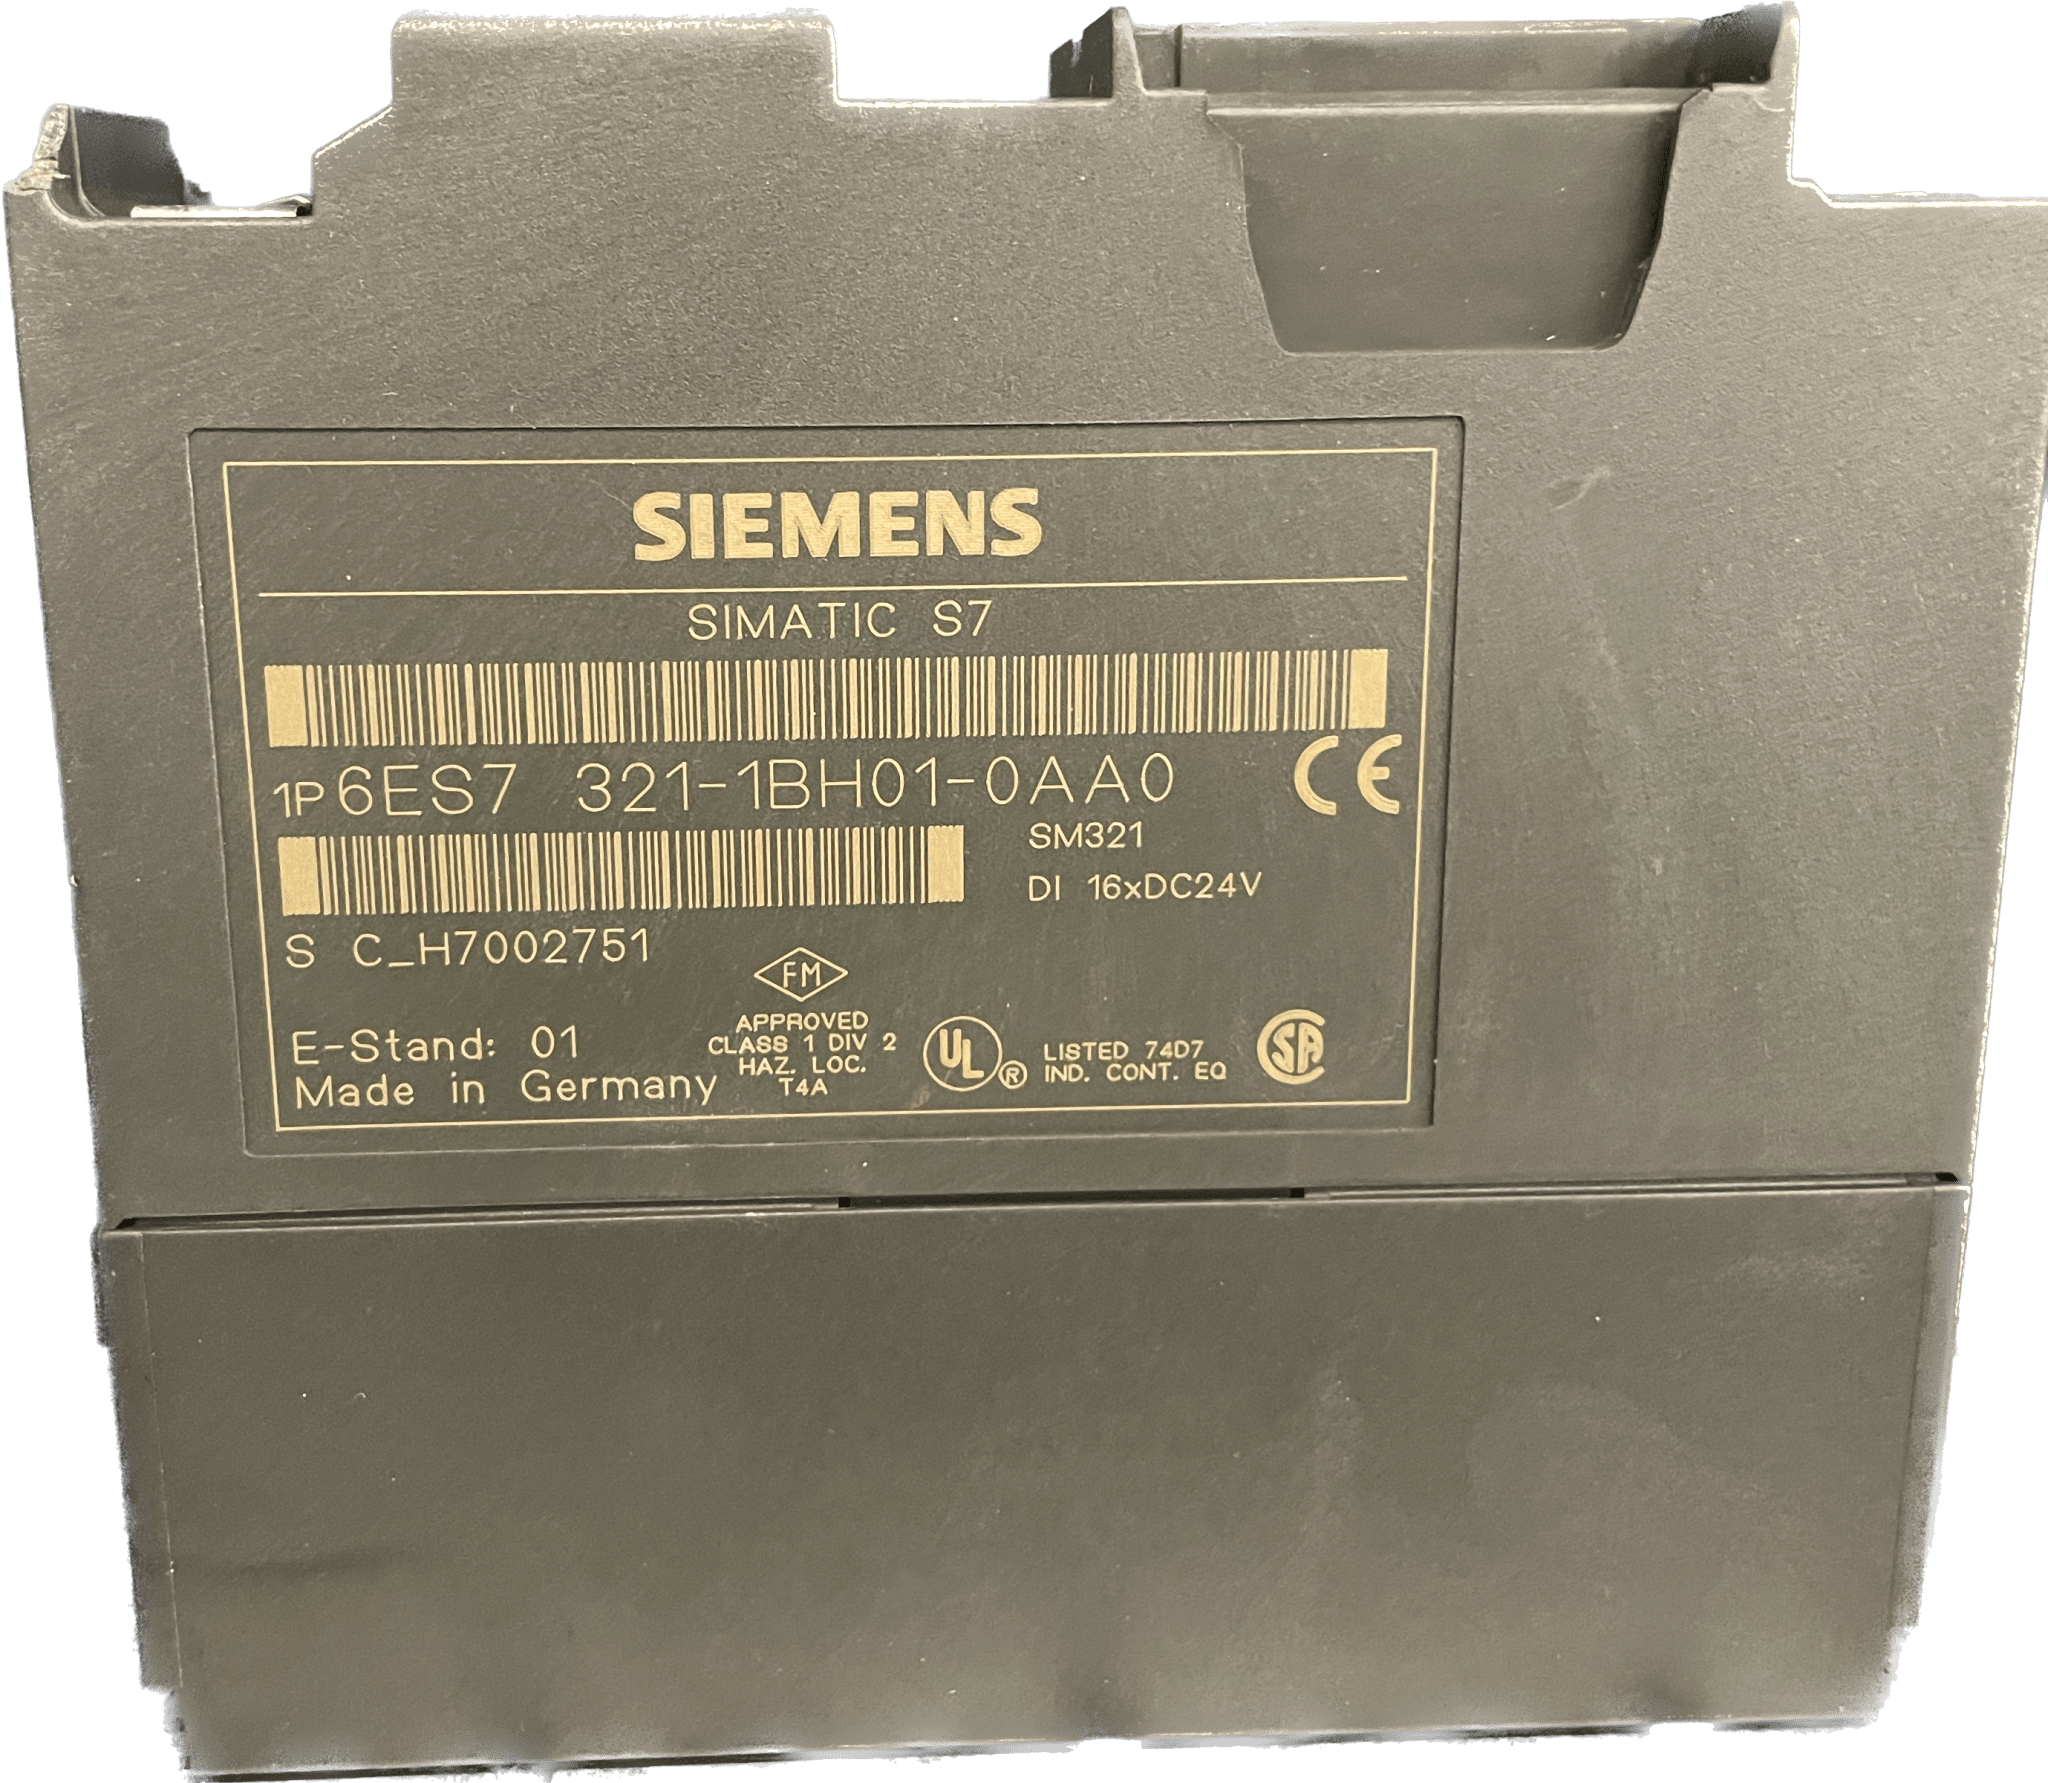 Siemens SIMATIC S7-300 6ES7321-1BH01-0AA0 - #product_category# | Klenk Maschinenhandel